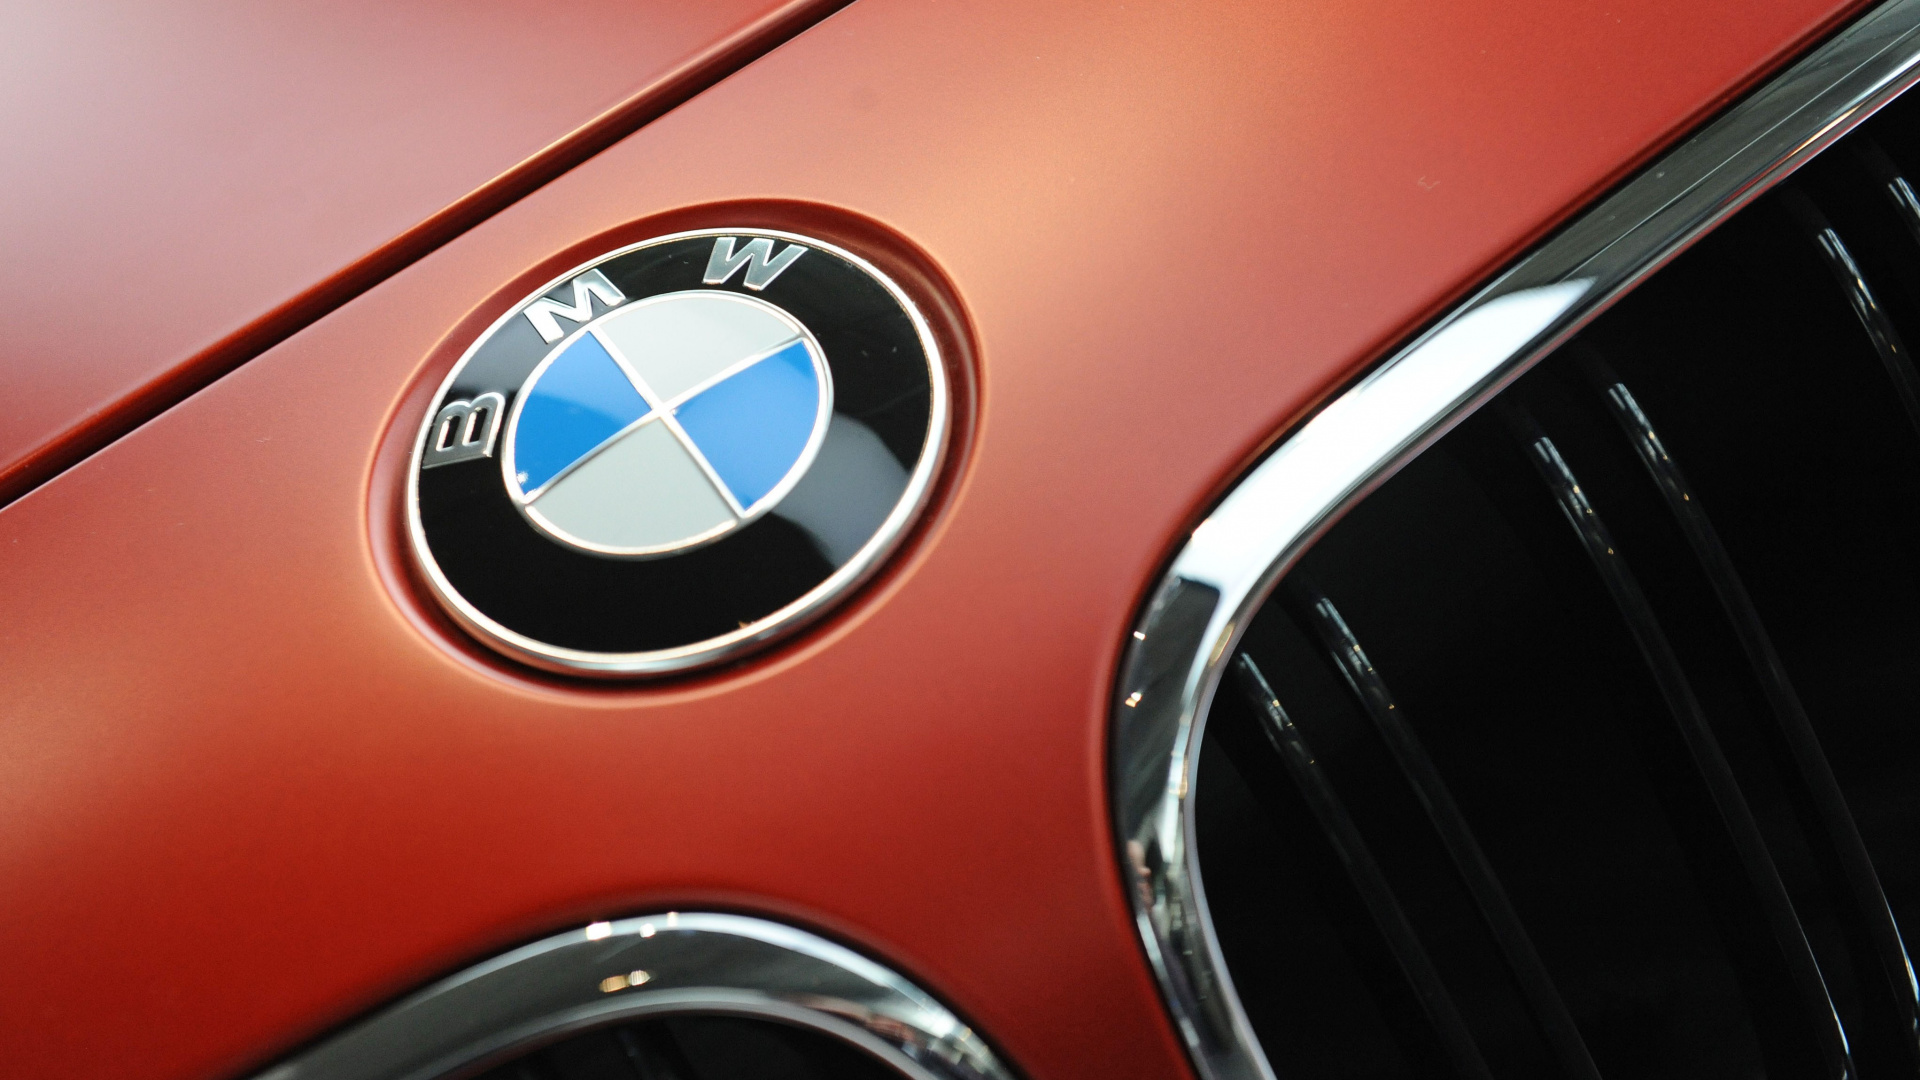 Red and Silver Bmw Car. Wallpaper in 1920x1080 Resolution